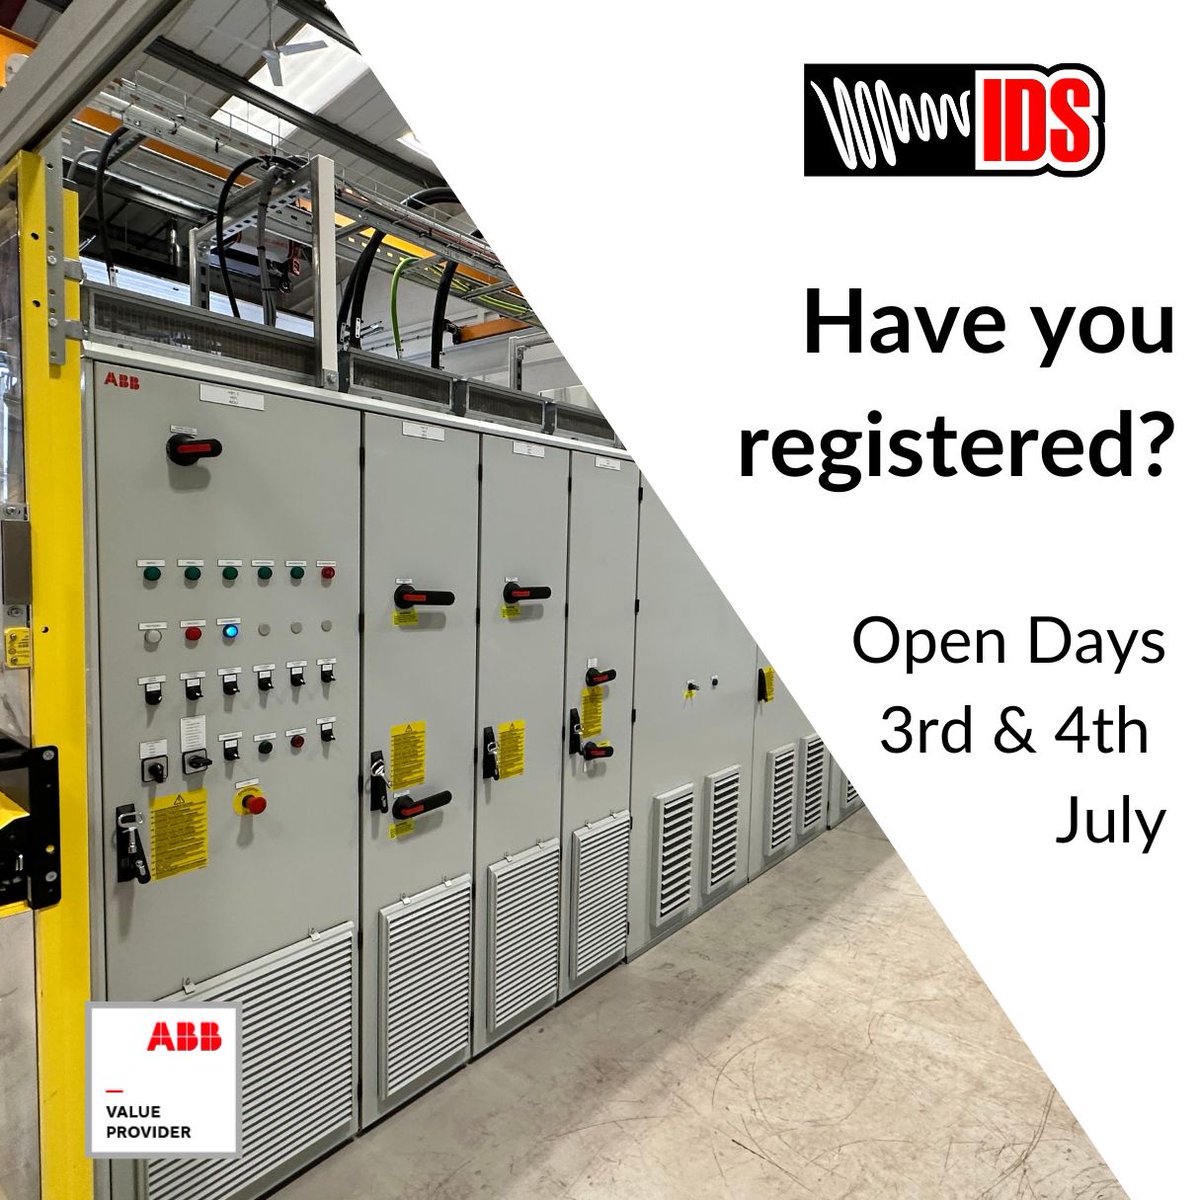 Have you registered for our open days? On July 3rd& 4th in collaboration with ABB and to celebrate 25 years of Technology, Innovation and Sustainability, we are hosting 2 informative open days. Find out more and register your interest here: inverterdrivesystems.com/ids-celebrates…